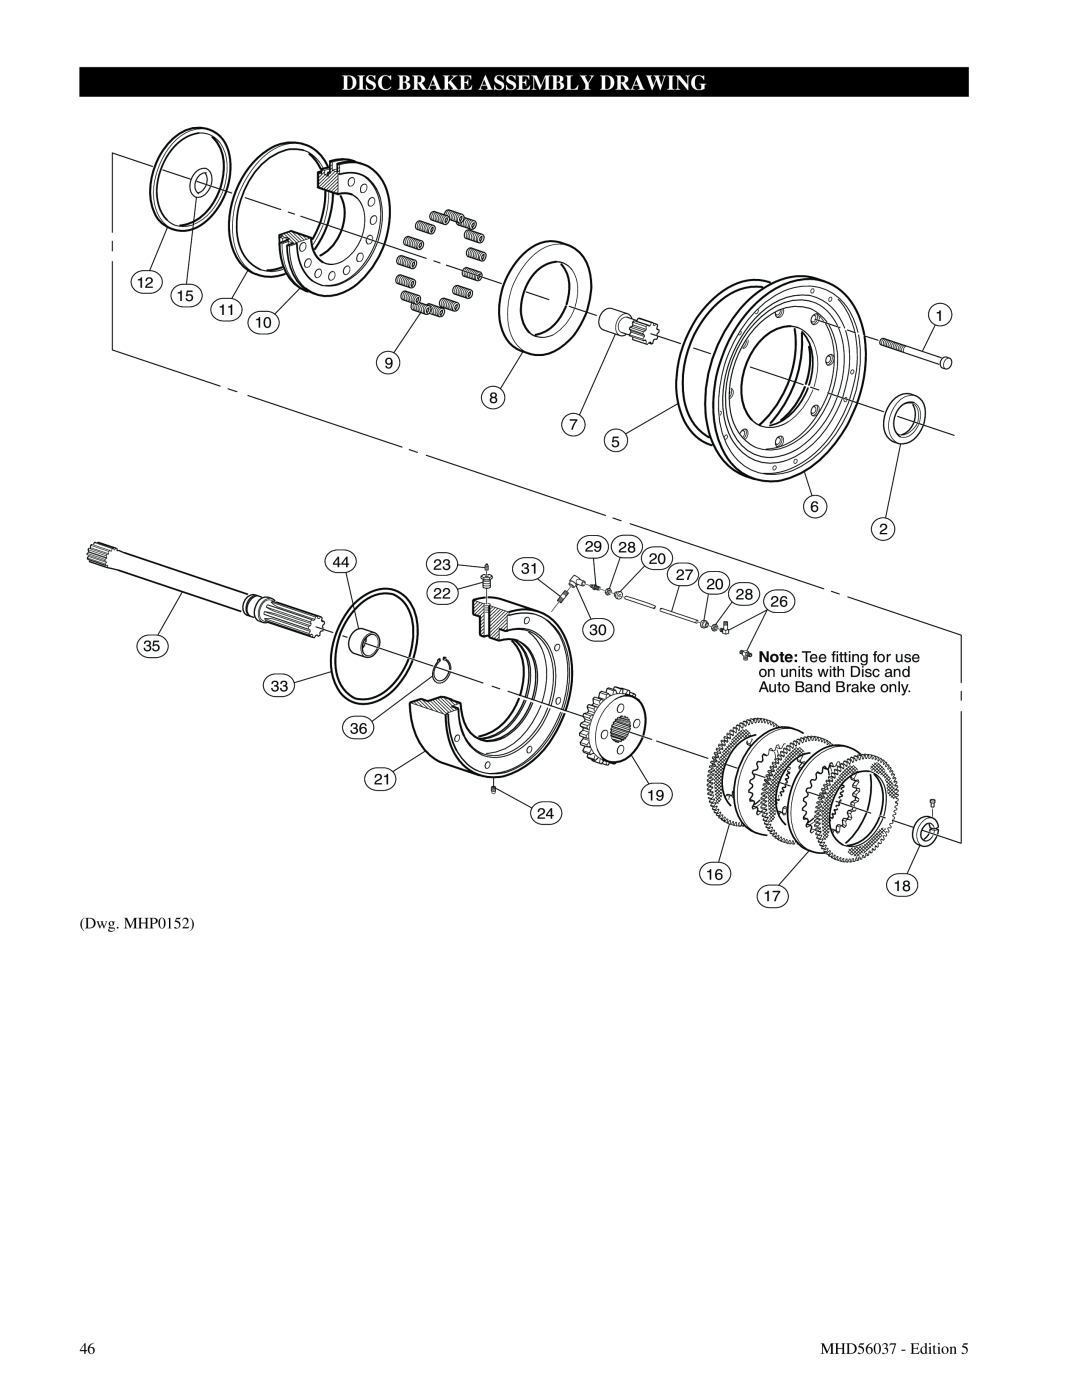 Ingersoll-Rand FA5T manual Disc Brake Assembly Drawing, Dwg. MHP0152, MHD56037 - Edition 